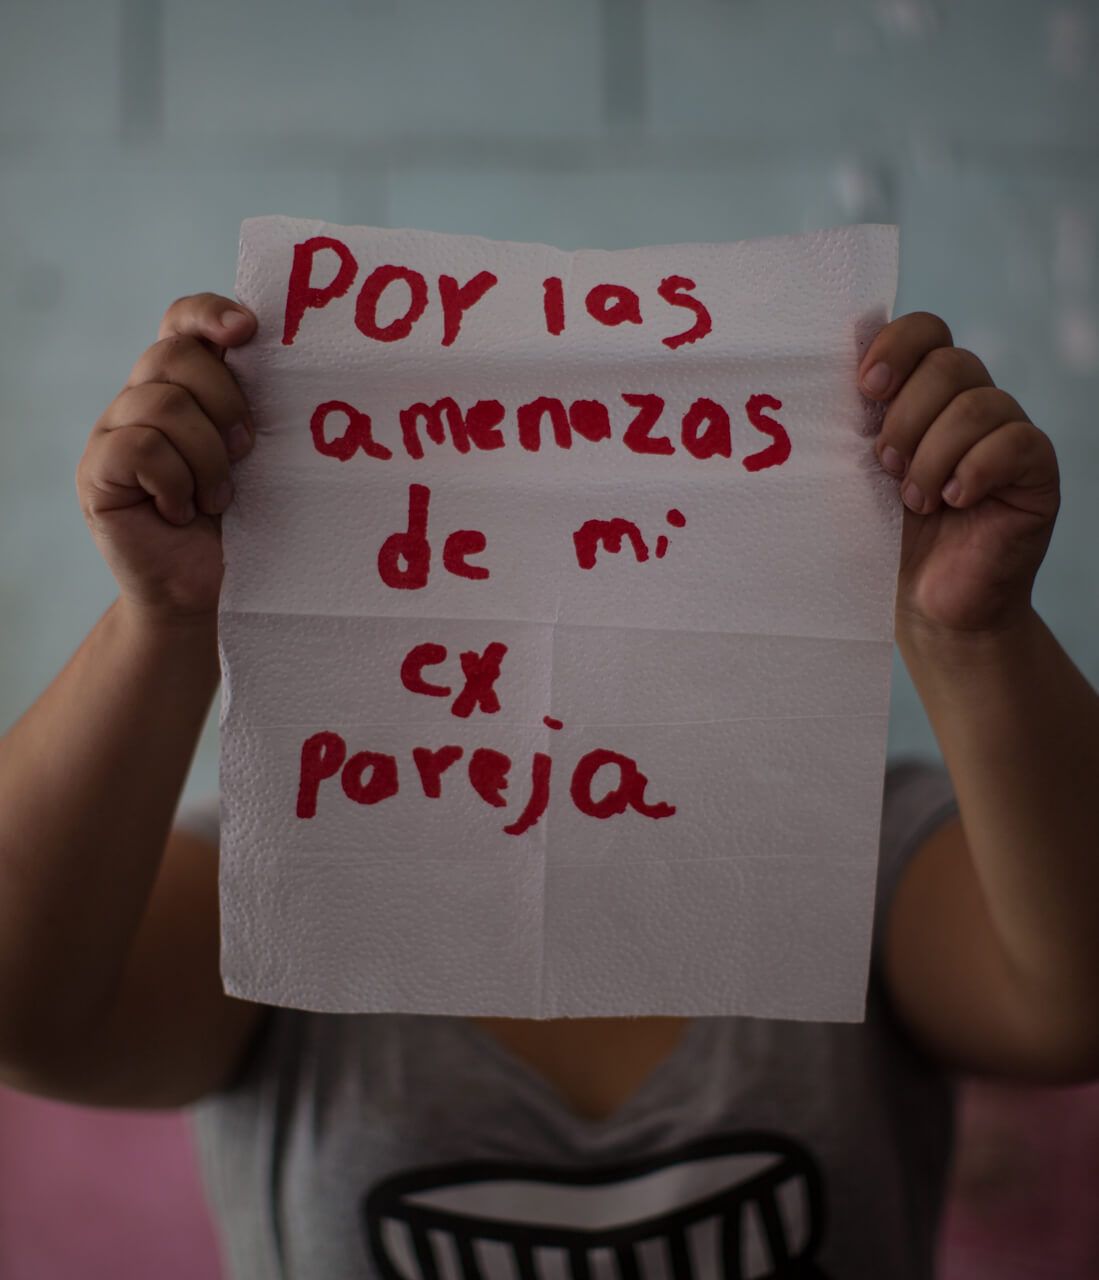 María, 22.

The napkin reads: "because of the threats by my ex-boyfriend." She lives in fear of her ex-partner, an MS-13 gang member whose violence led her to a suicide attempt at age 15. From time to time, she thinks of killing herself when she realizes that she must face life on her own and without the support of her partner, who was killed by members of the other gang, Barrio 18. She currently resides in the United States, where she is requesting asylum. Although she says she feels peace, she is still afraid.

Image by Almudena Toral. El Salvador, 2018.